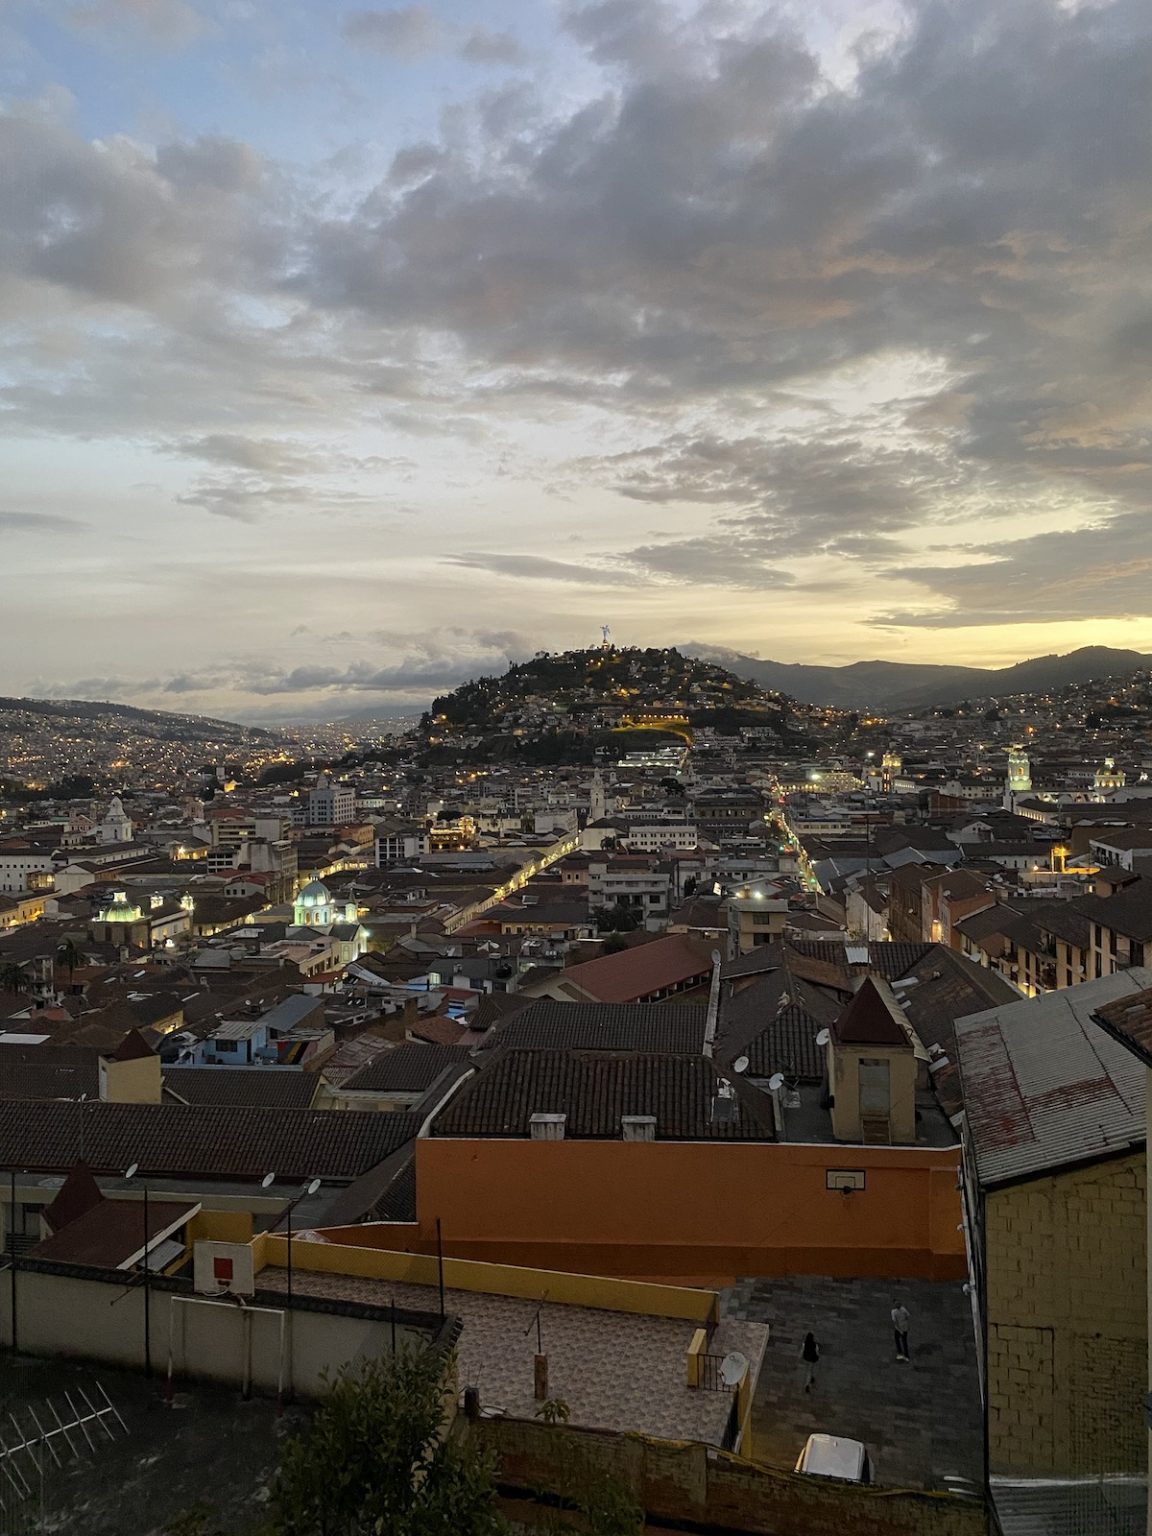 Is Quito Safe For Tourists? A Safety Guide To Quito and How We Managed It My Trip To Ecuador